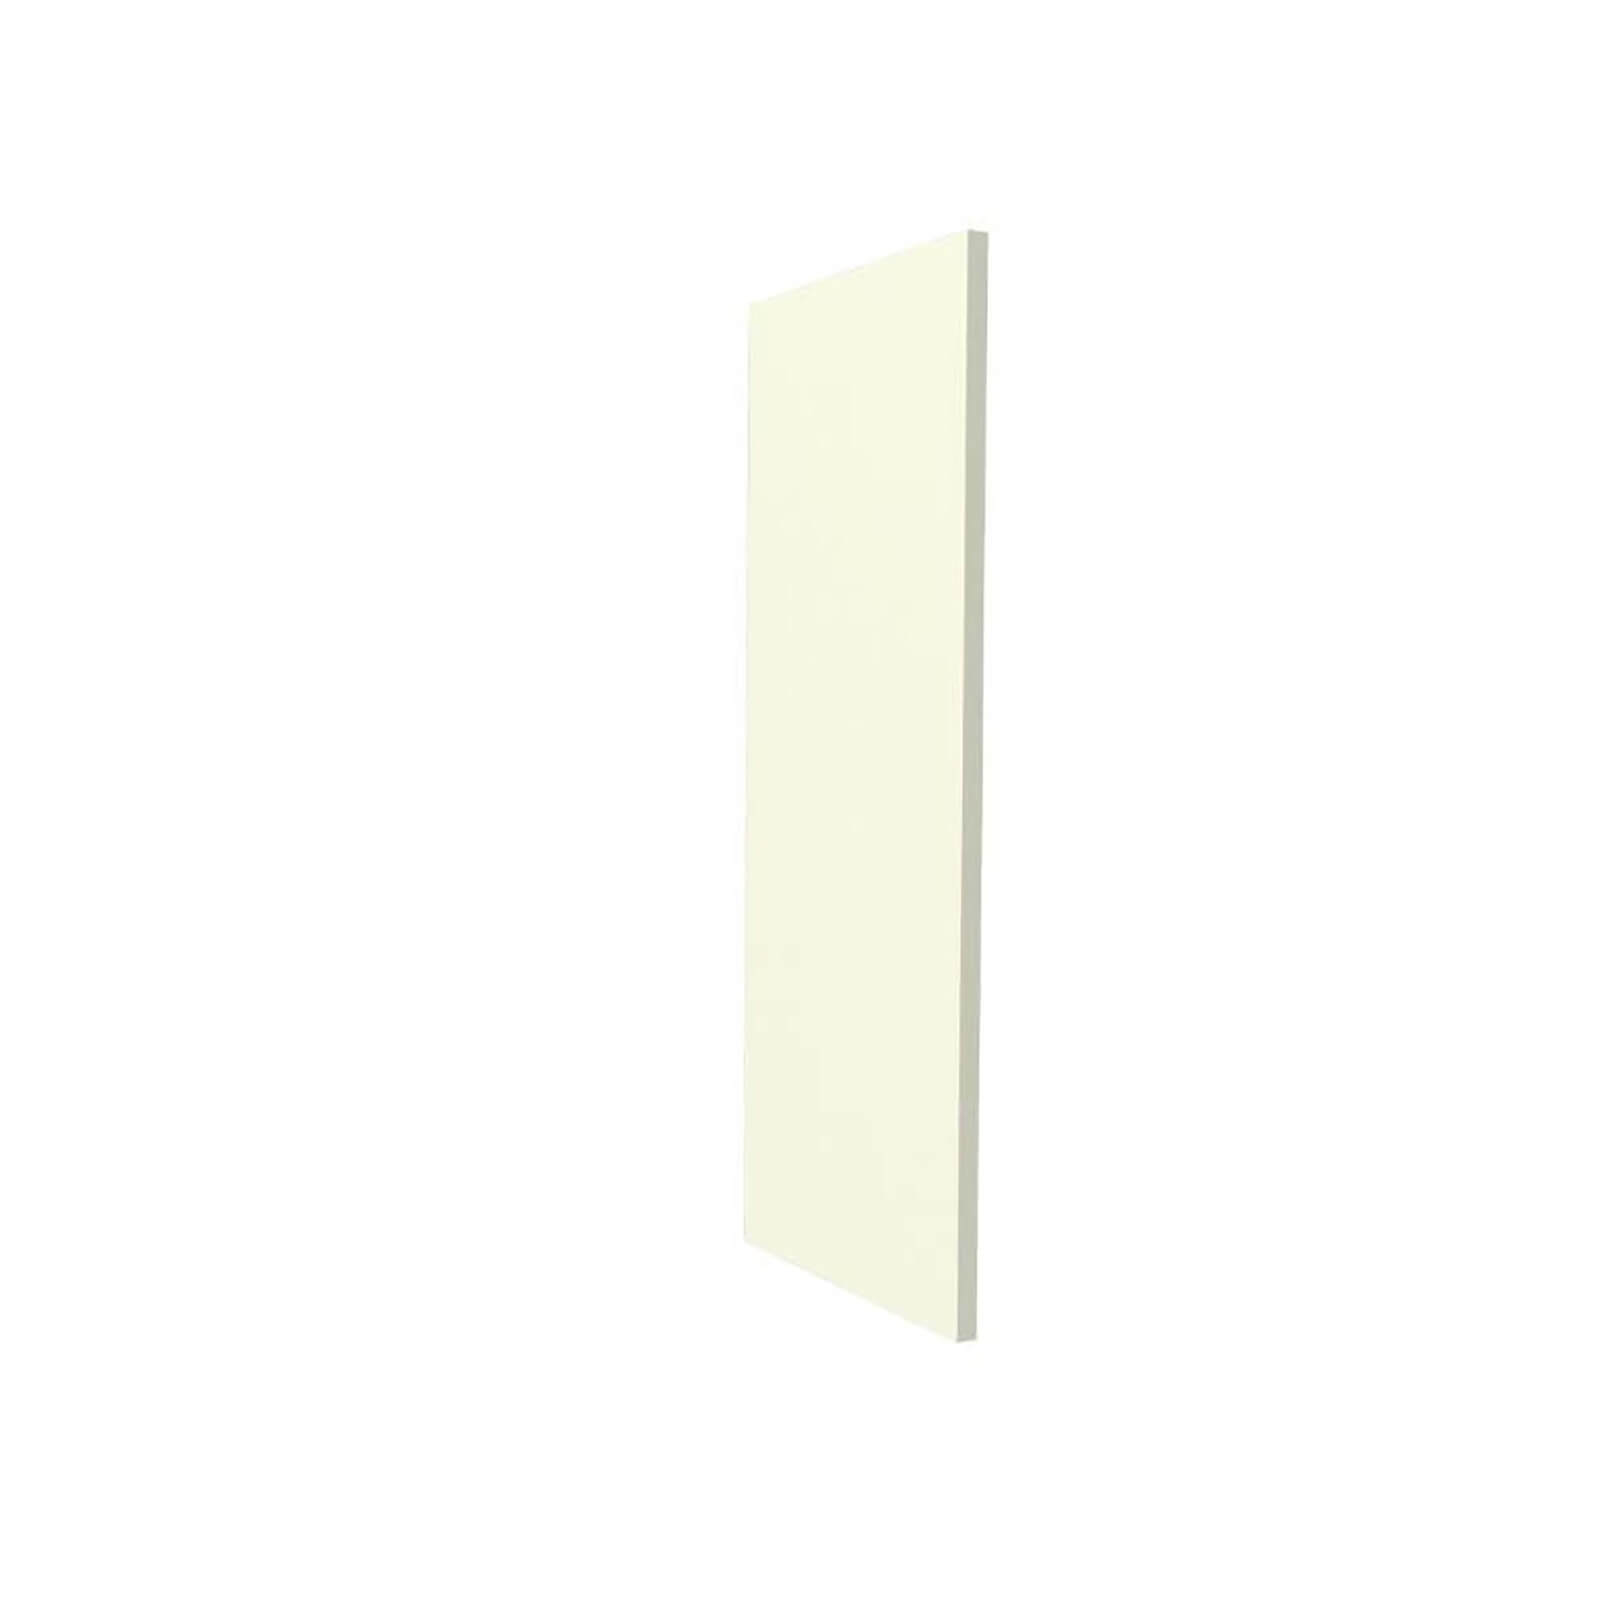 Photo of Country Shaker Light Cream Clad On Wall End Panel